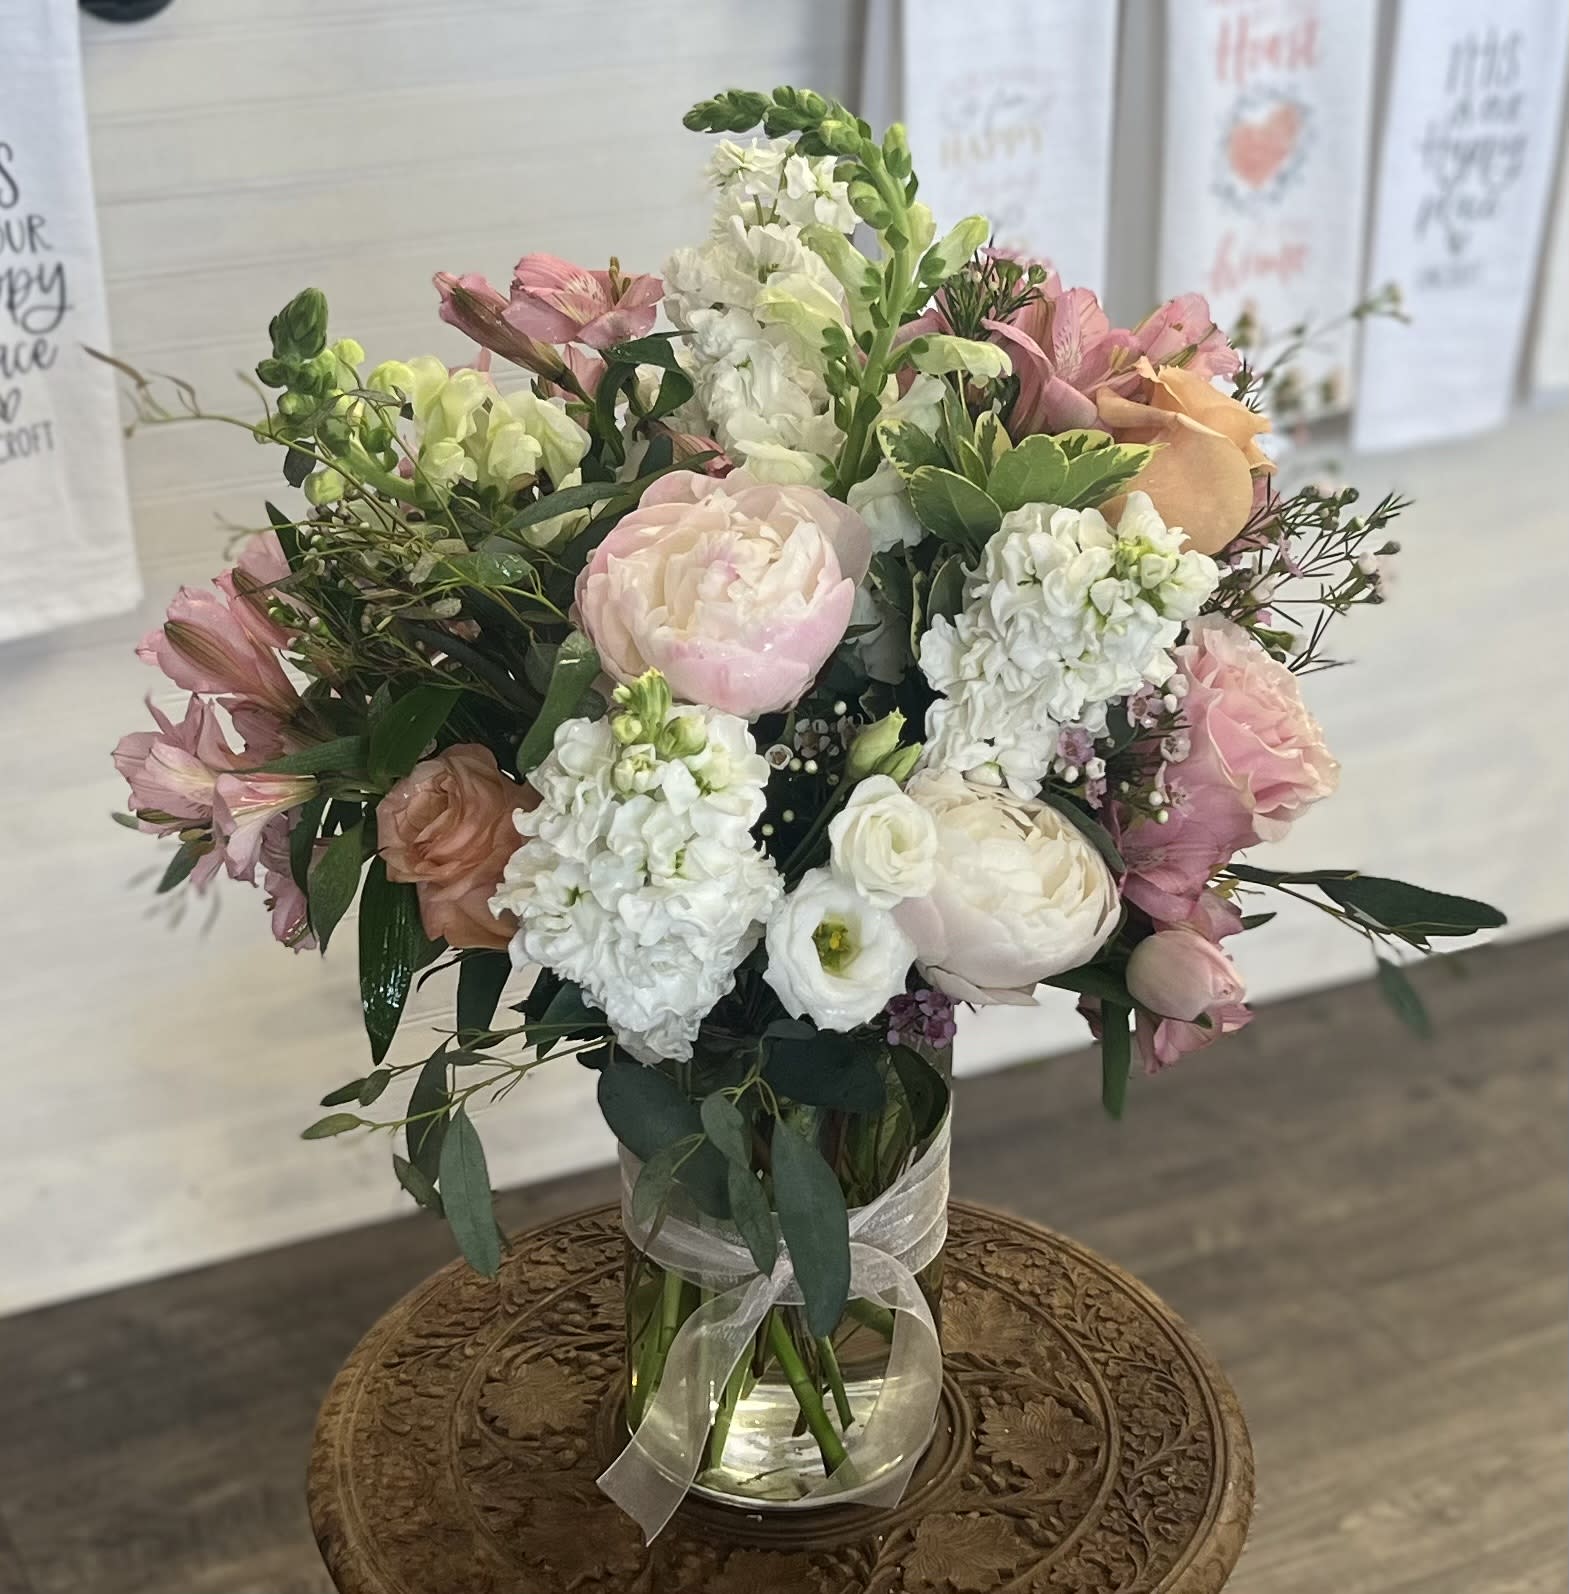 Crazy in Love - This beautiful arrangement has it all. Peony, stock, lizzy, roses, snapdragon and alstroemeria.